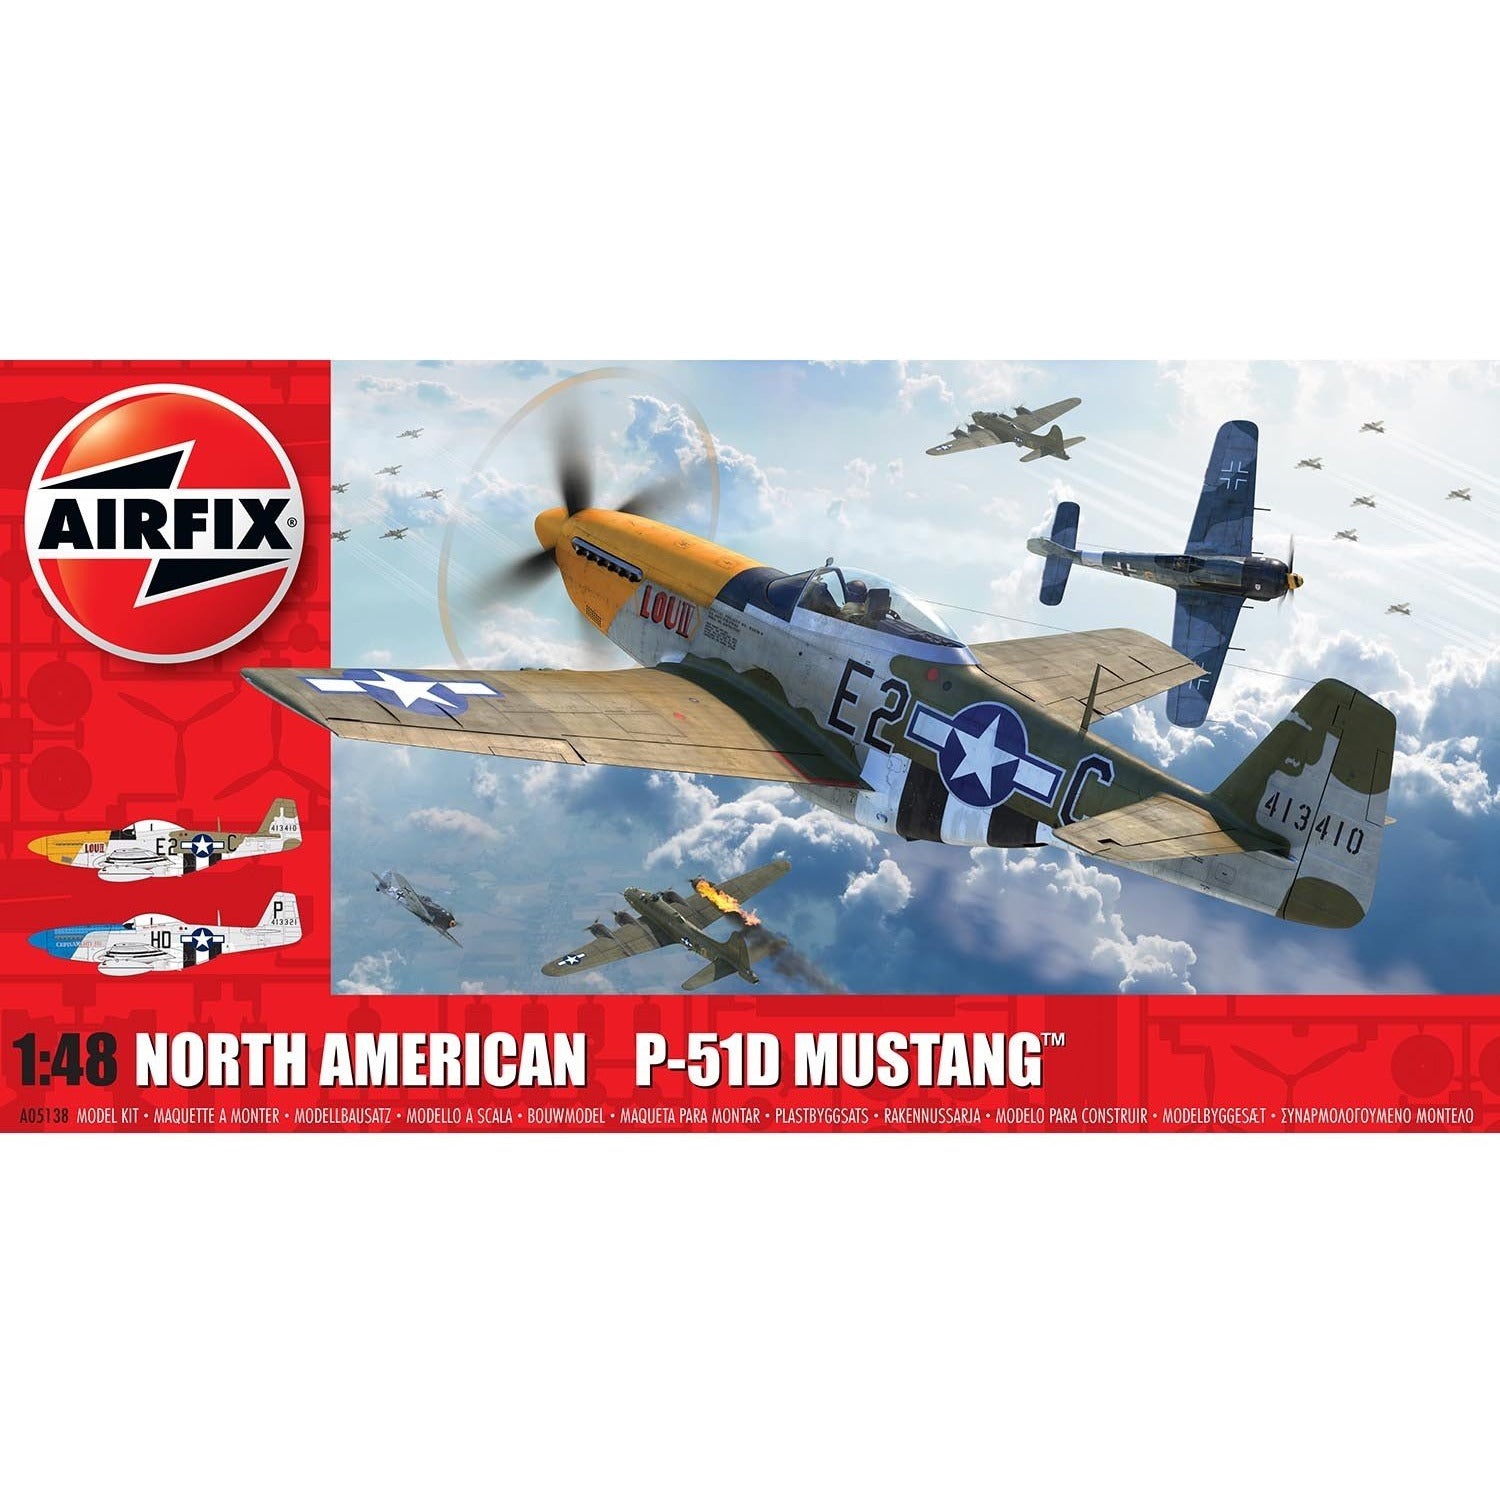 North American P-51D Mustang 1/48 by Airfix